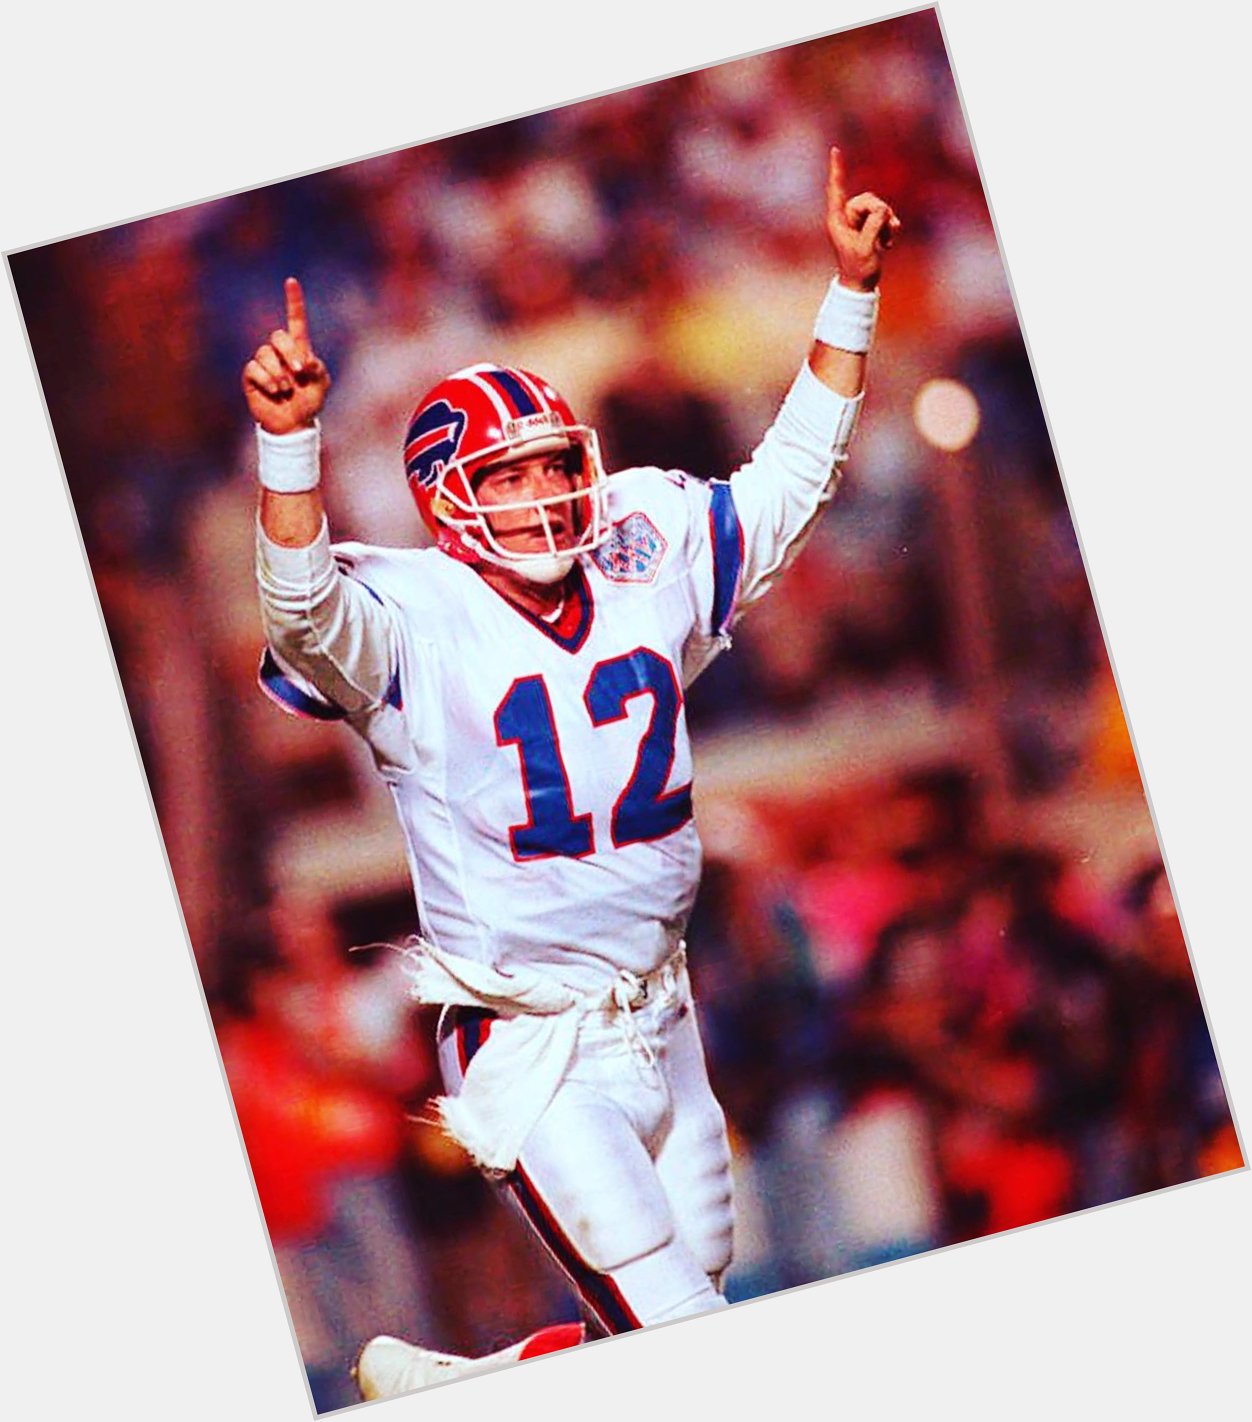 Happy Birthday Jim Kelly, one of the greatest with or without a SB! will always remember! 